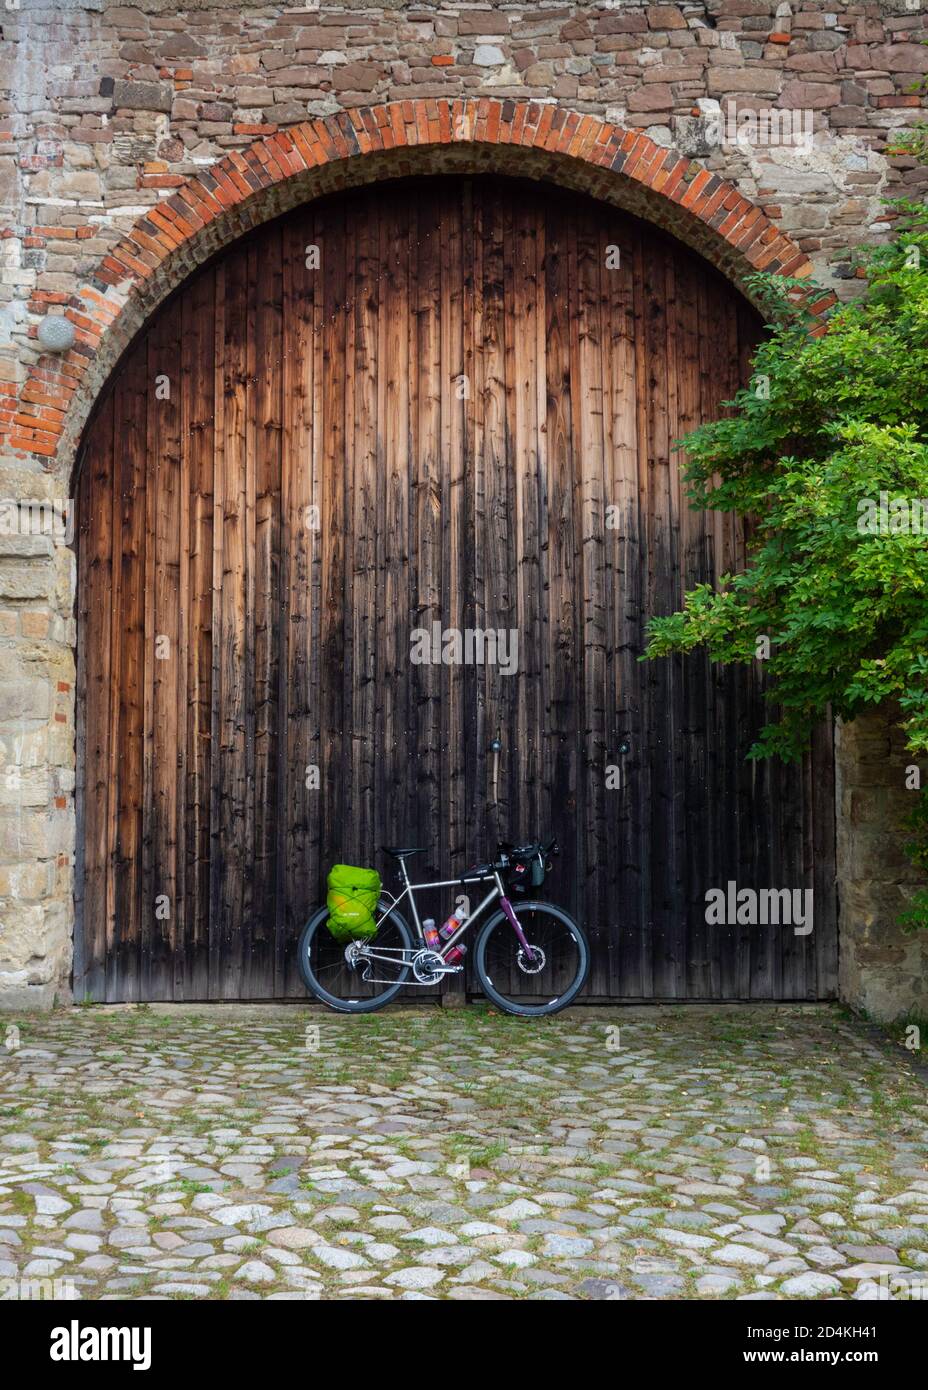 A titanium bike with drop bars and panniers parked in front of a big wooden gate surrounded by quarry stone masonry and cobbles. Thale, Harz region. Stock Photo